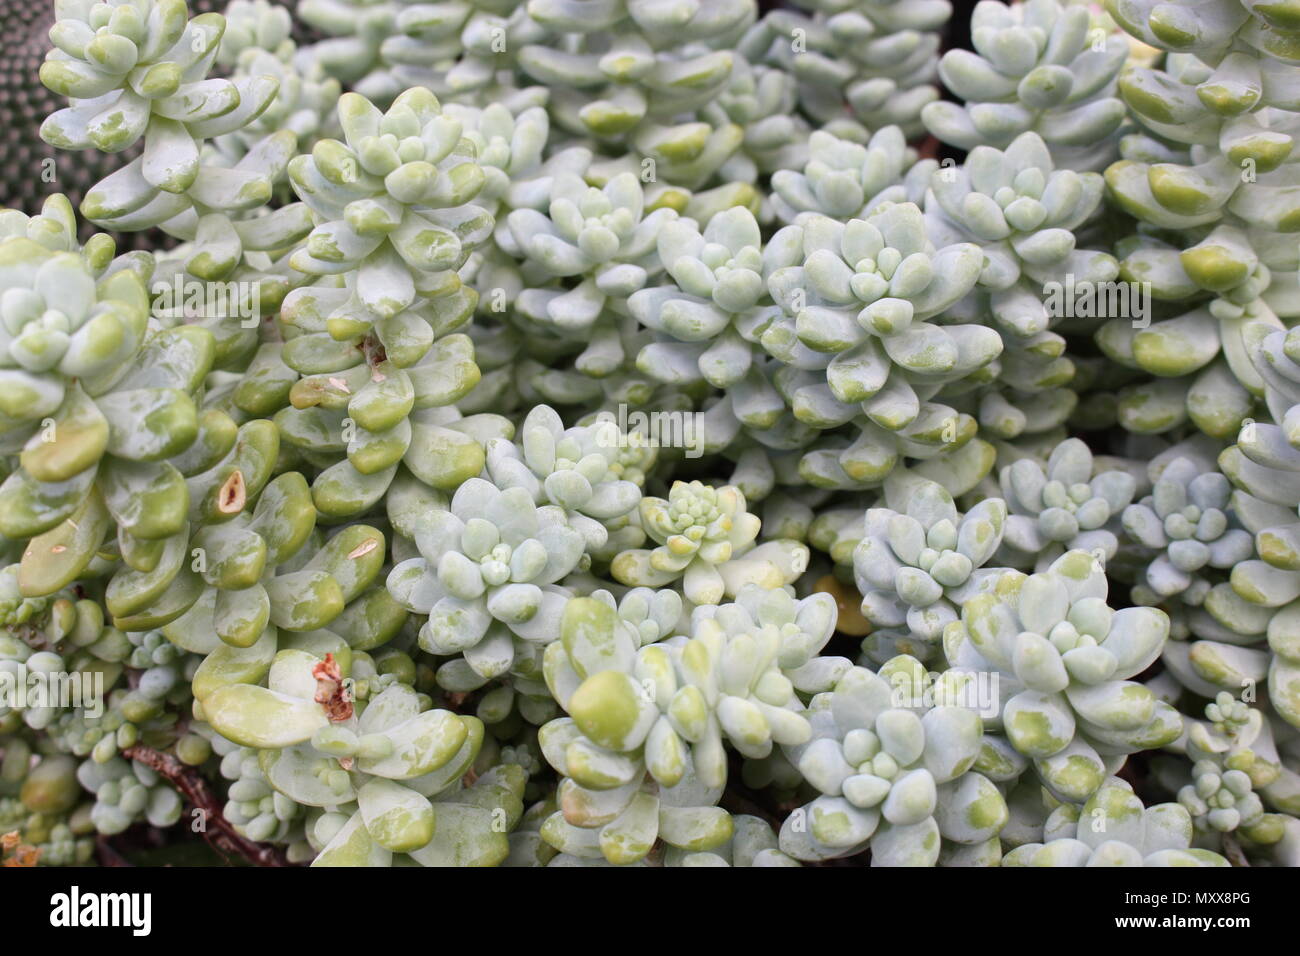 Unusual bulbous foliage of Moonstones succlent (pachyphytum oviferum), a member of the stonecrop family and popular foliage house plant. Stock Photo